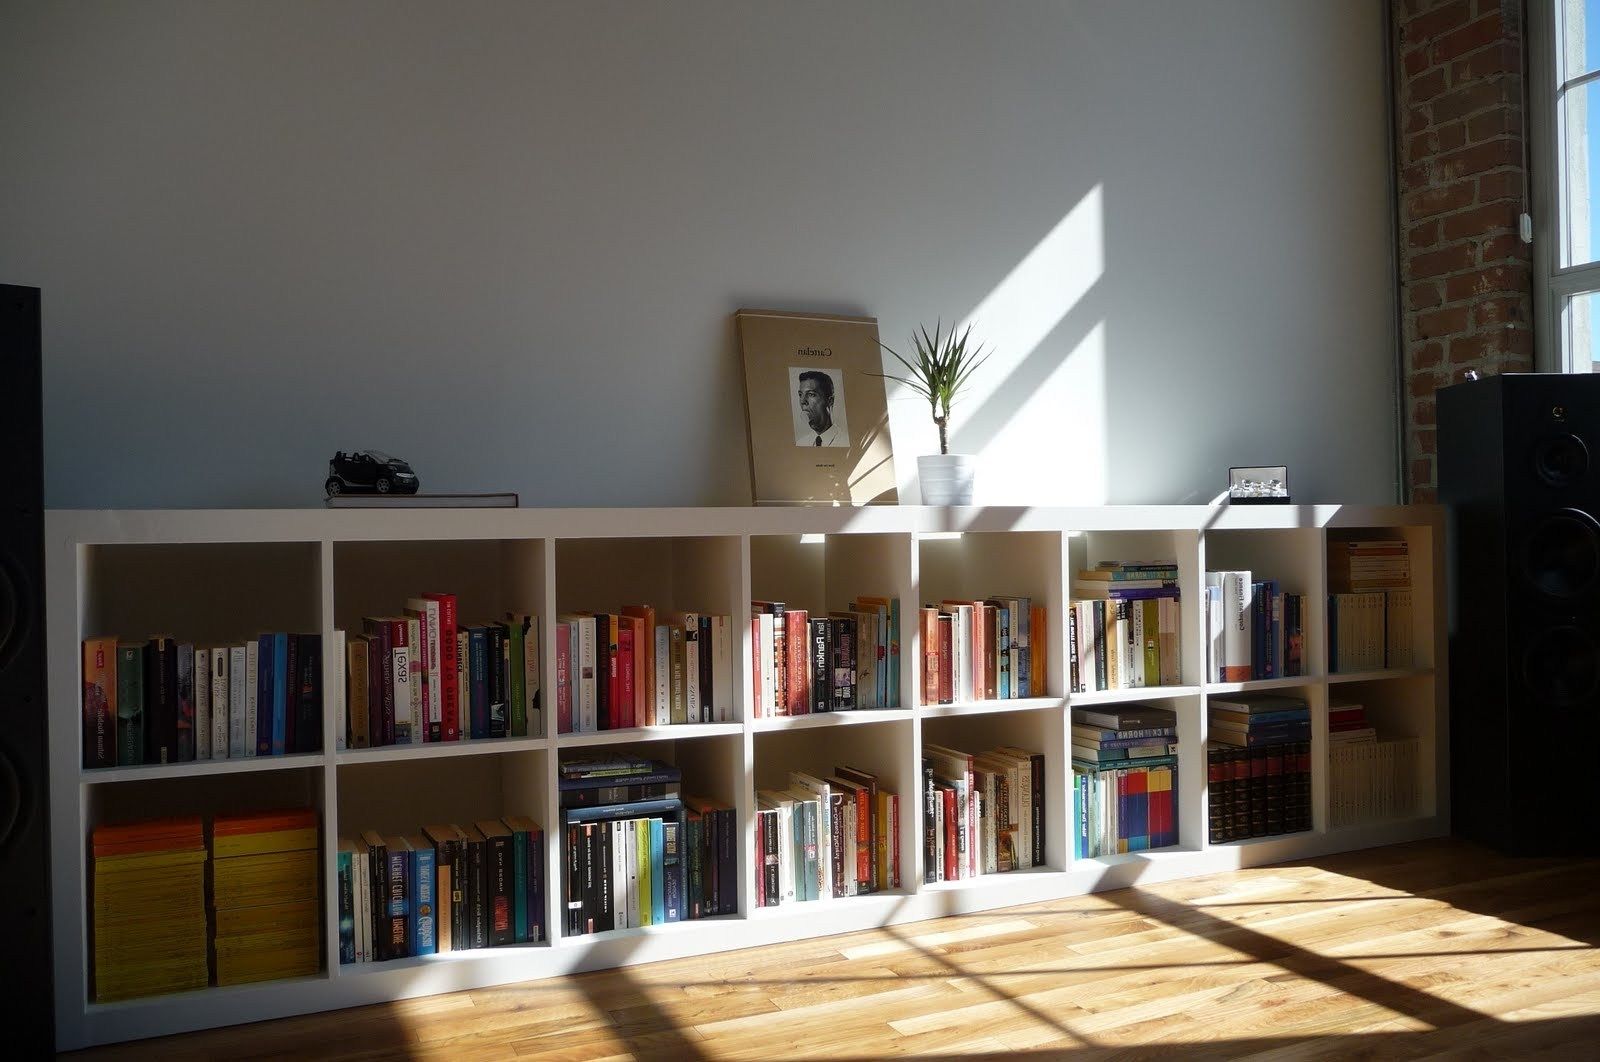 2017 Combined Book Shelves To Create A 2x8 Expedit – Ikea Hackers With Expedit Bookcases (View 6 of 15)